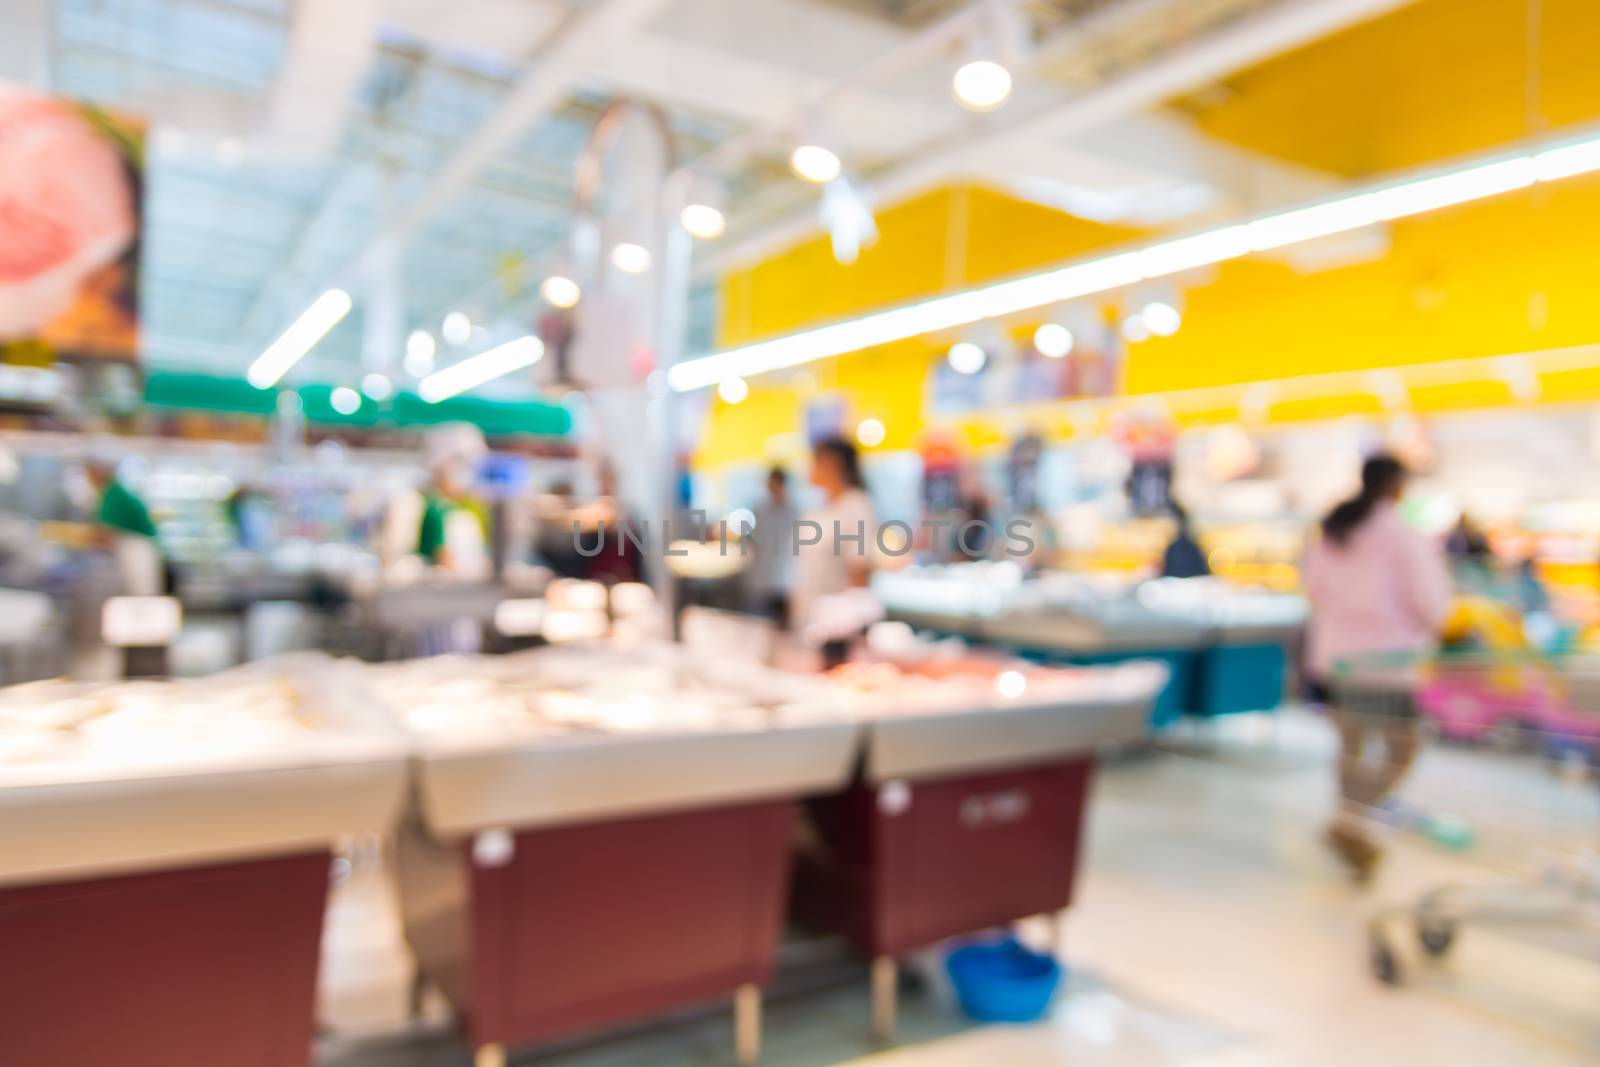 Abstract Blur Defocus Background of People Shopping Meat or Pork Products in Hypermarket or Supermarket Convenience Store Outlet as Modern Lifestyle Concept.